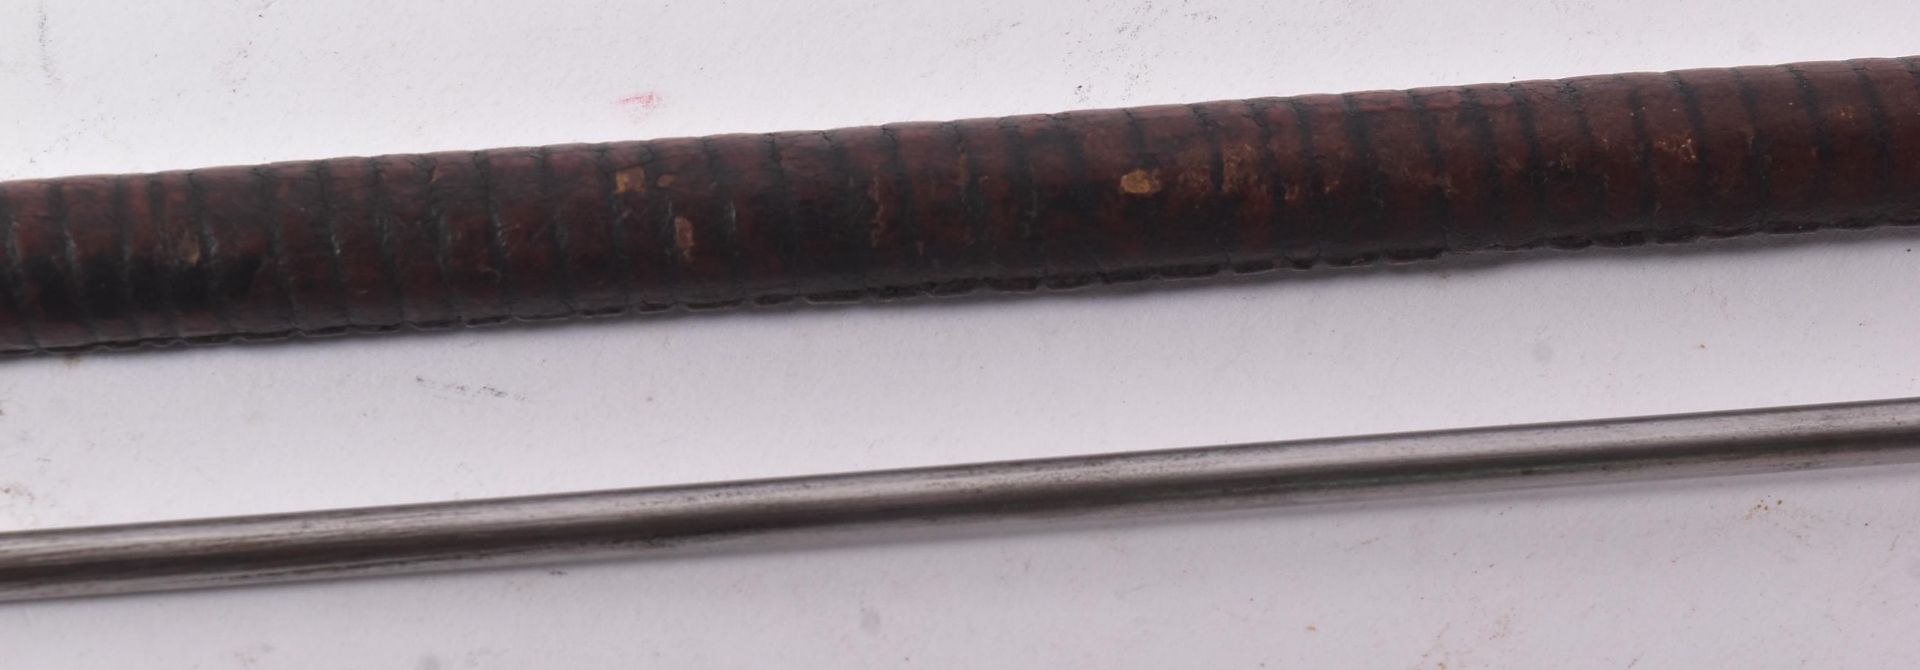 19TH CENTURY EASTERN RIDING CROP WITH CONCEALED BLADE - Image 4 of 4